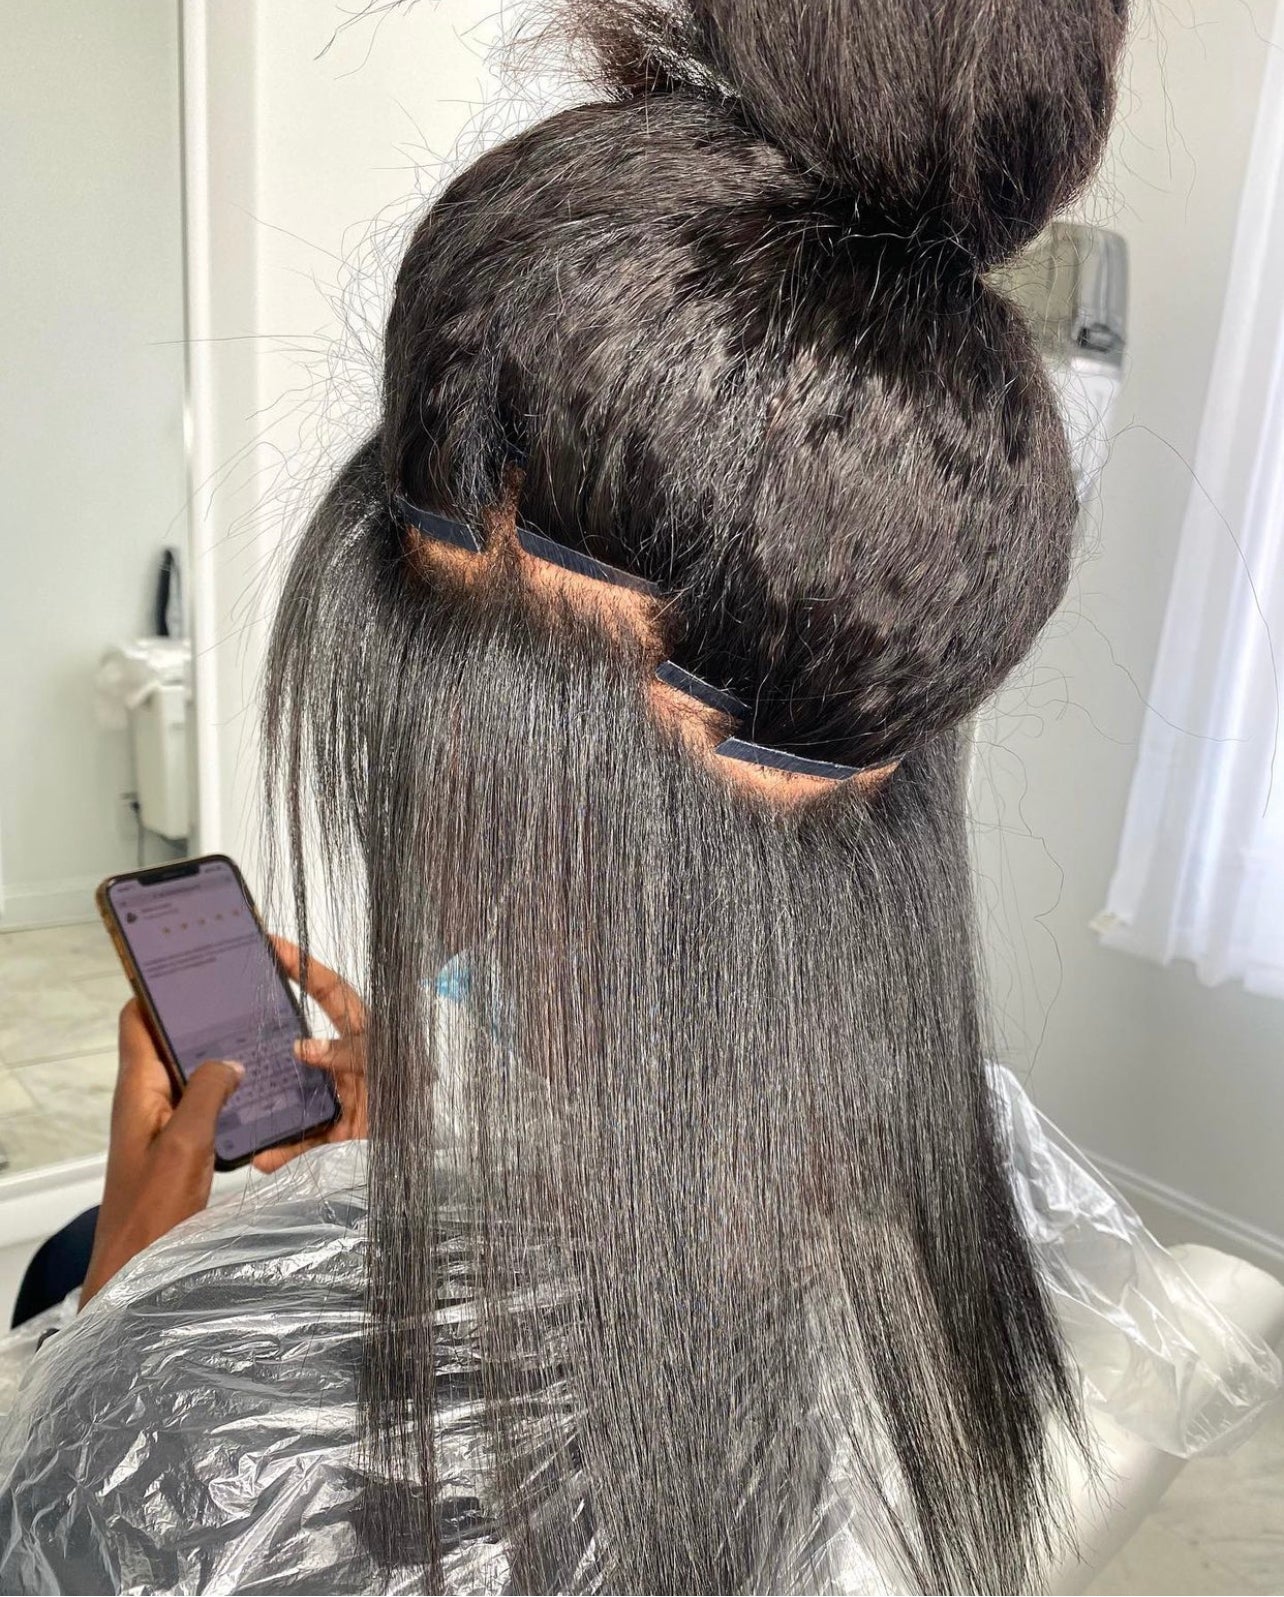 Tape In Extensions